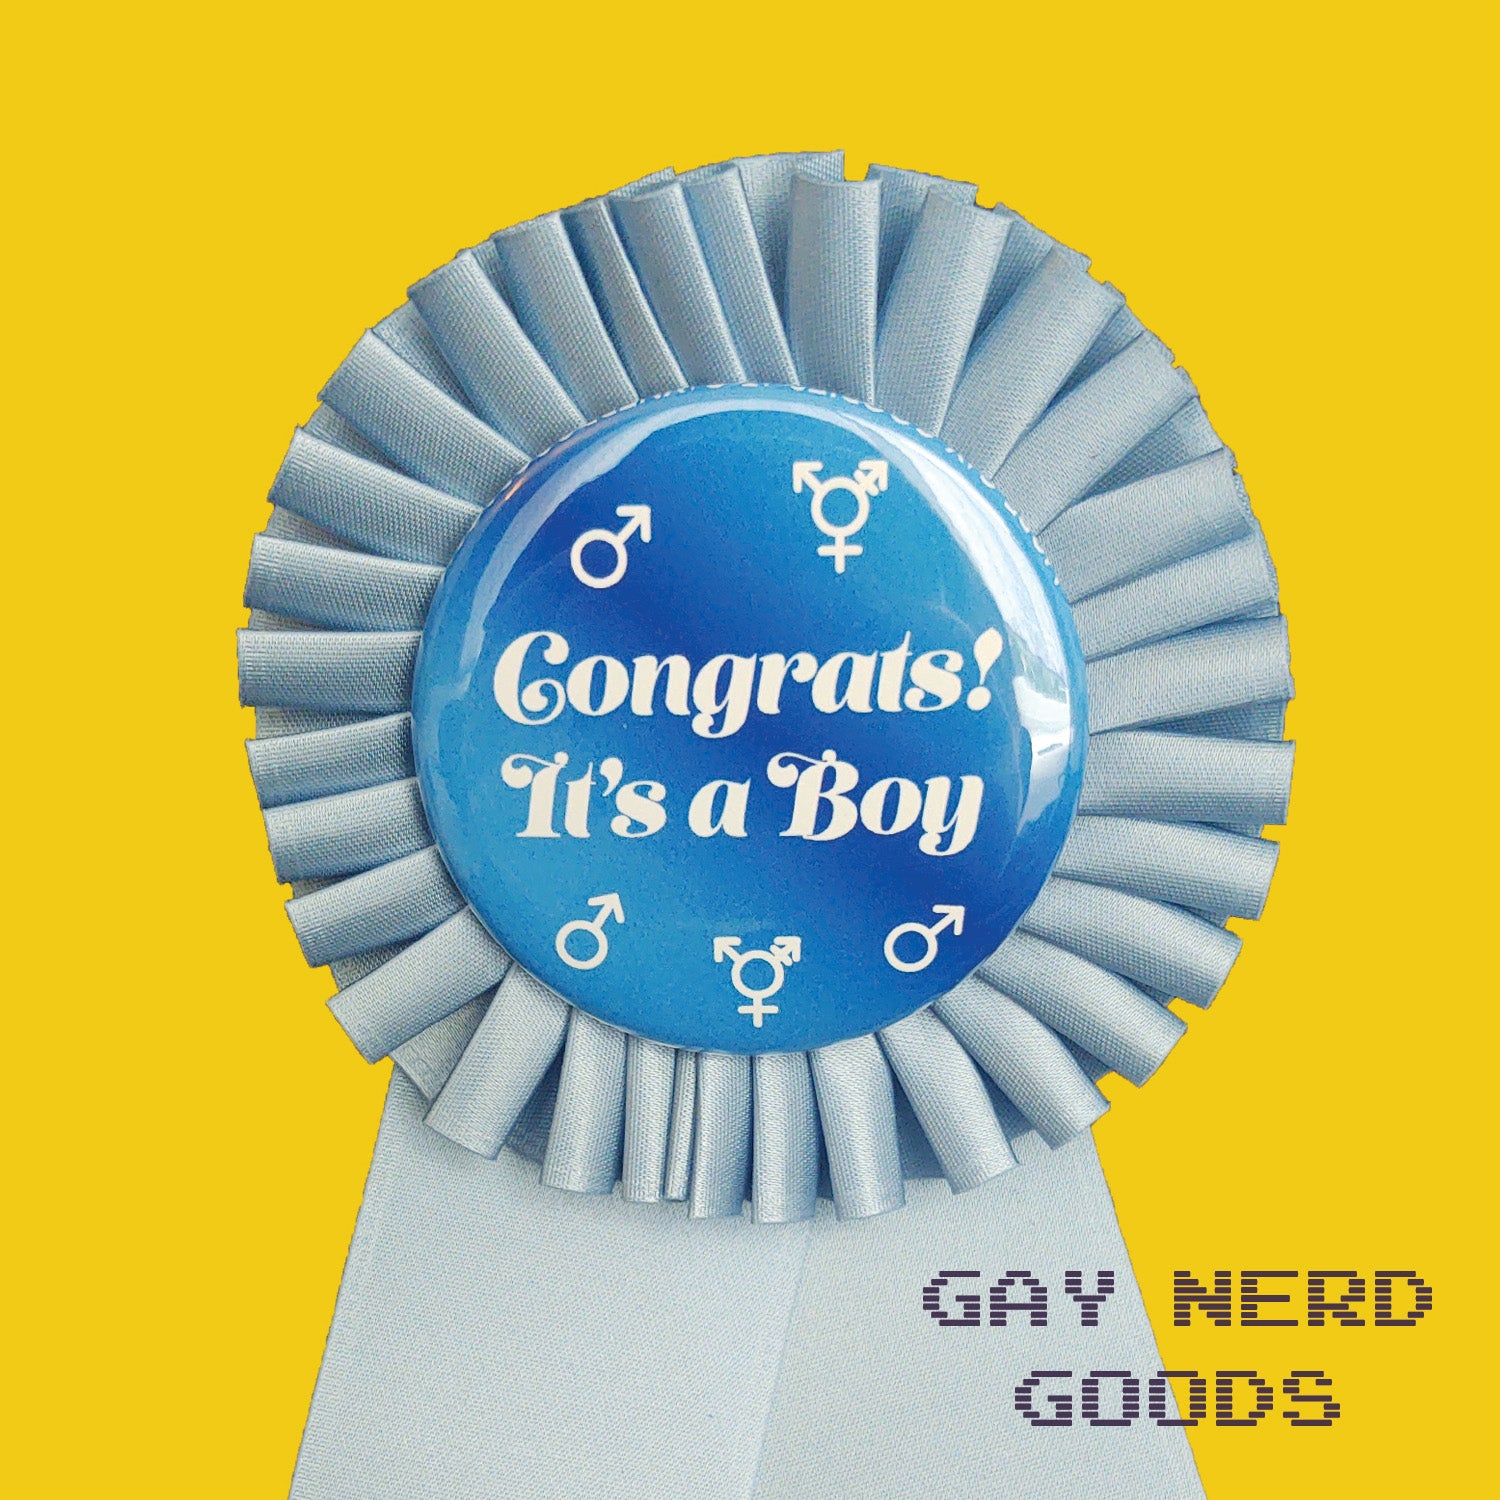 close up detail of the "congrats! it's a boy" award ribbon. the text is white surrounded by white trans and male symbols. The background of the design is dark and medium blue gradient and the ribbon is light blue.